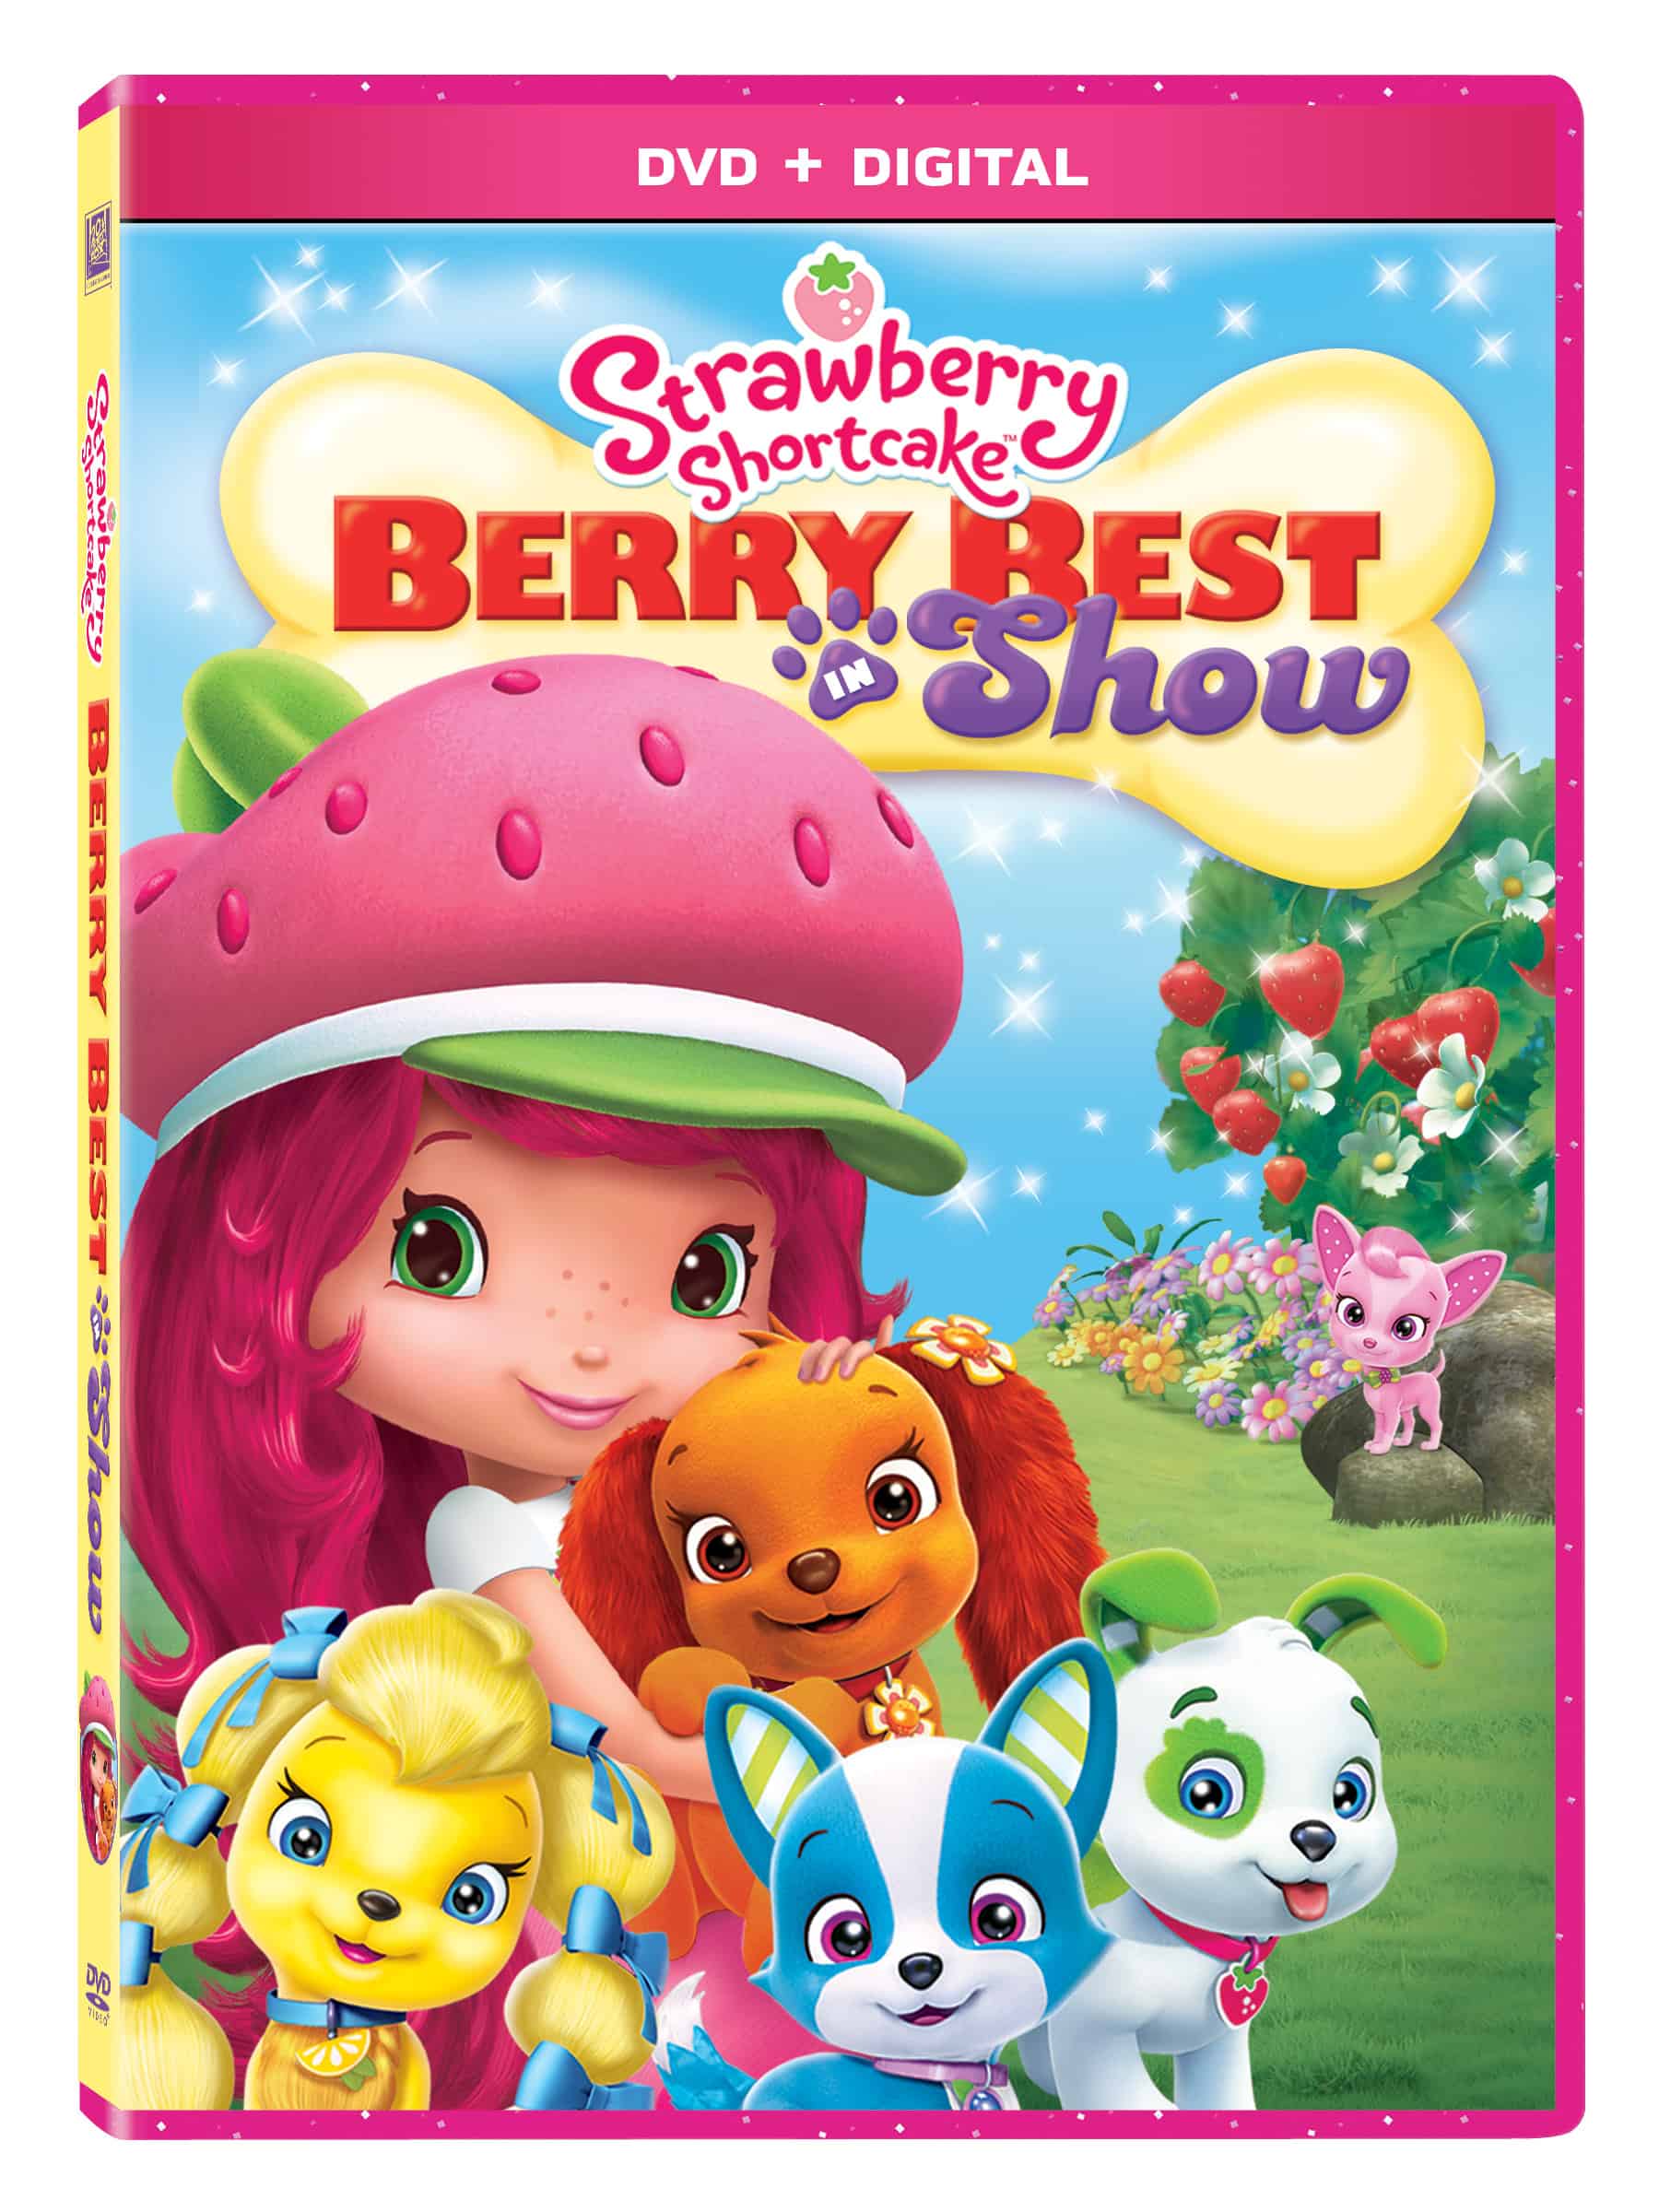 Strawberry Shortcake: Berry Best In Show Free Printable Coloring Sheet + DVD Giveaway!